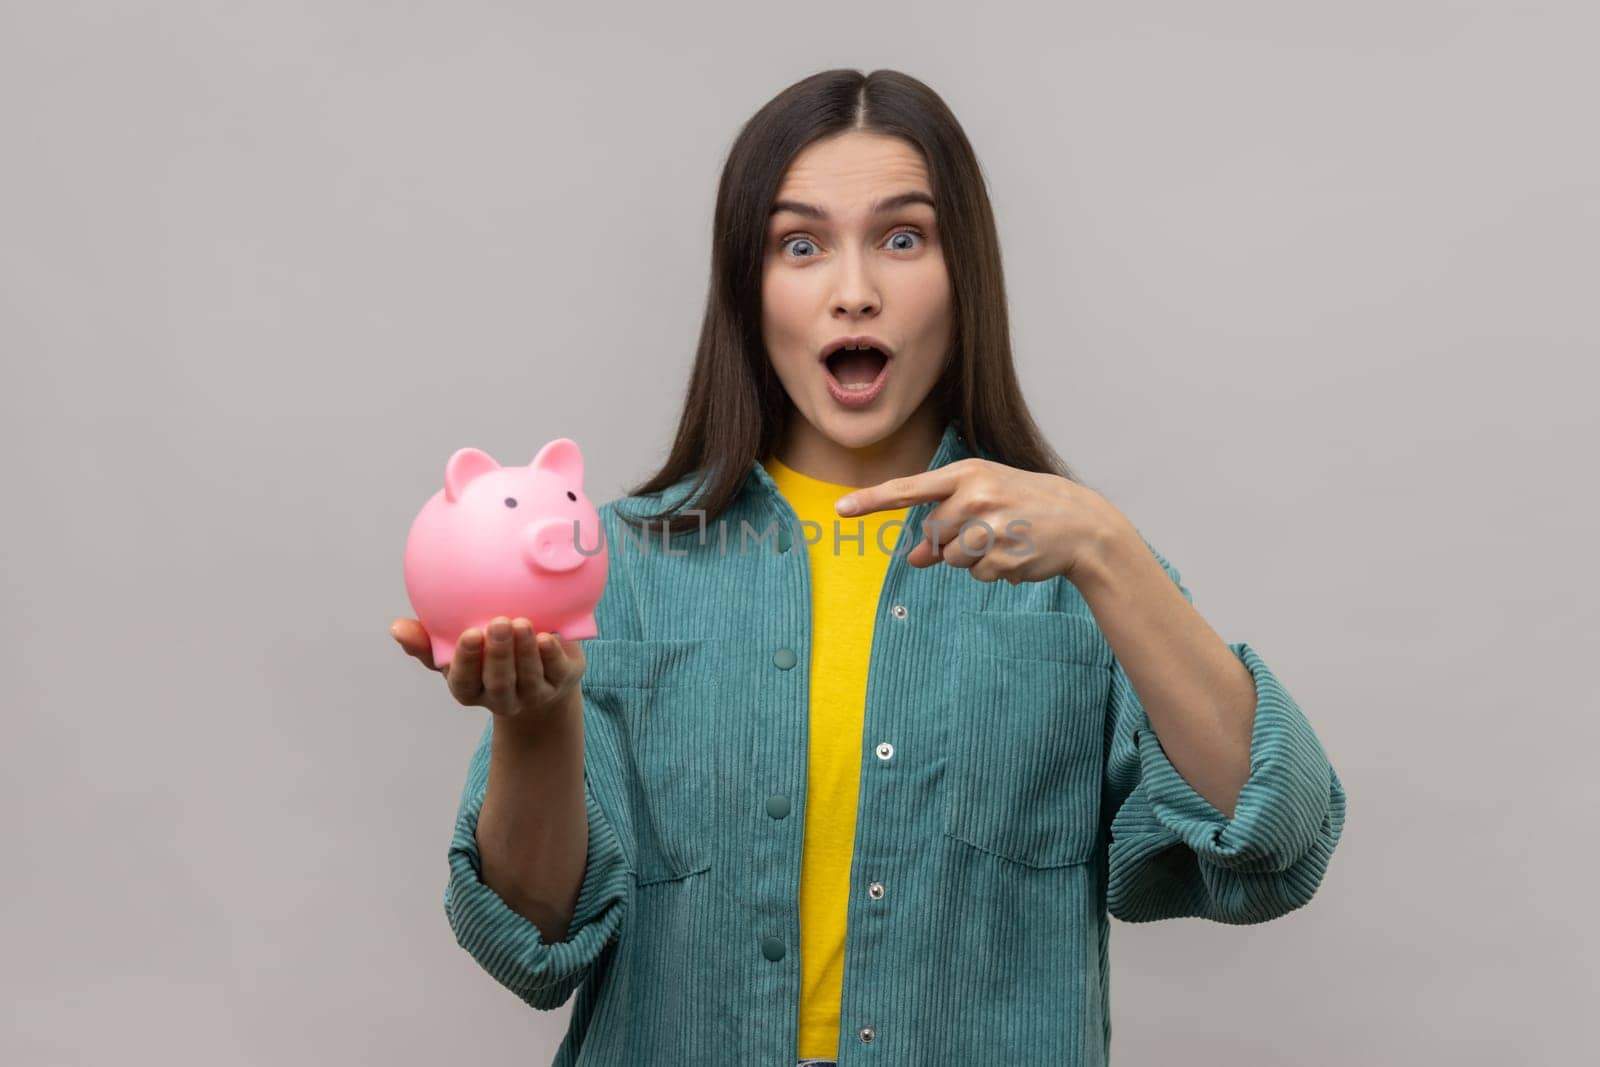 Portrait of amazed woman with dark hair standing pointing at piggy bank in her hand, advantageous bank offer, wearing casual style jacket. Indoor studio shot isolated on gray background.